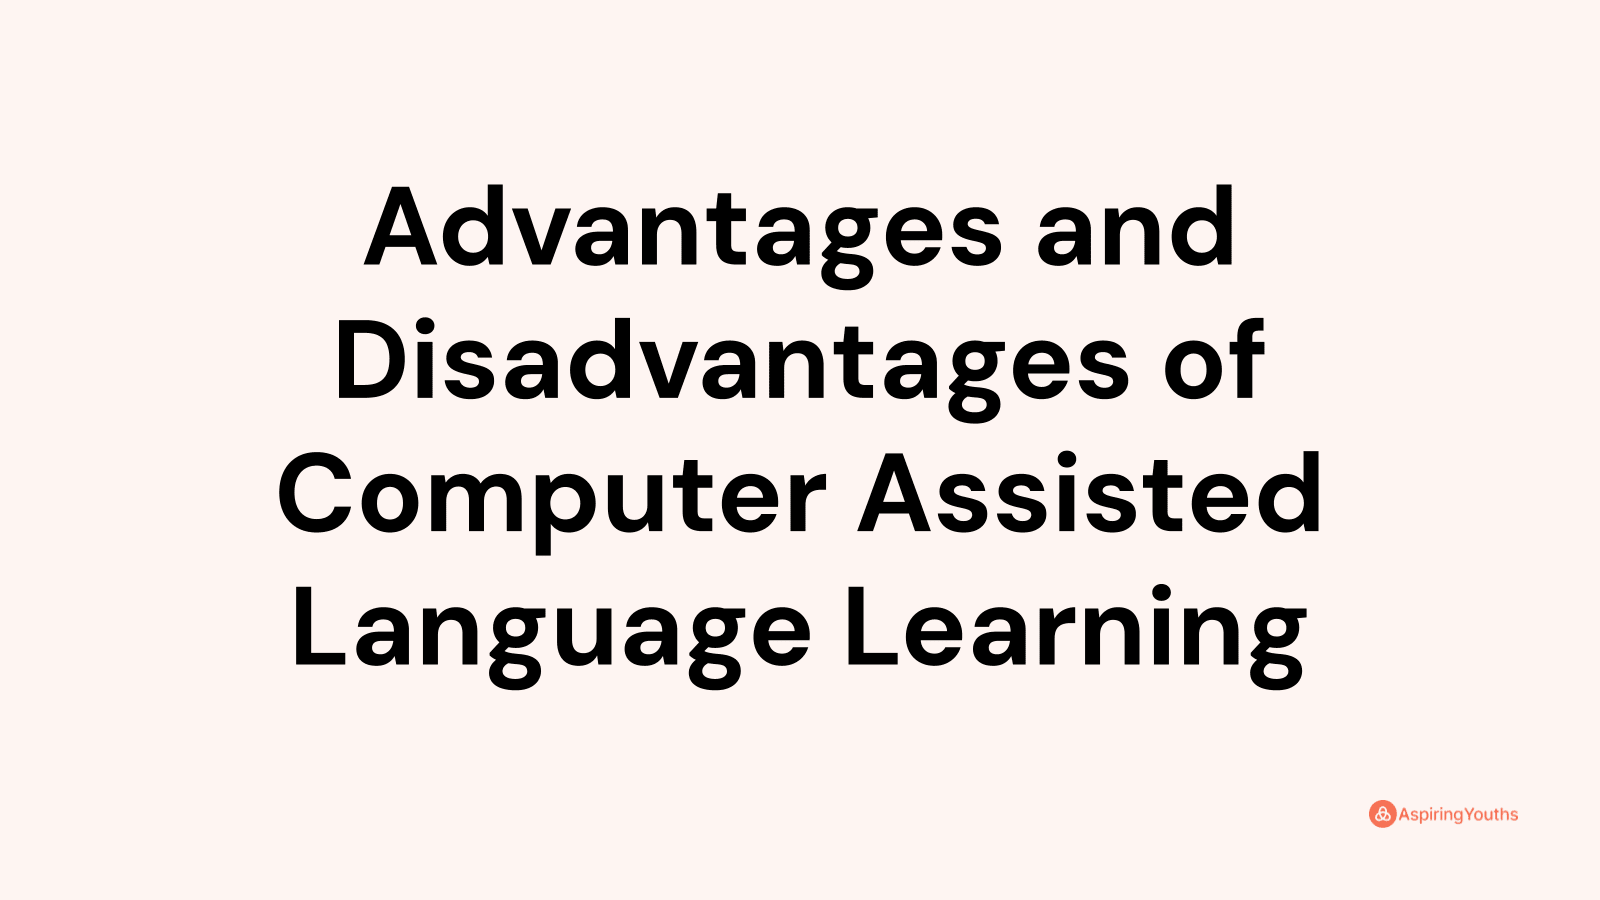 Advantages and disadvantages of Computer Assisted Language Learning